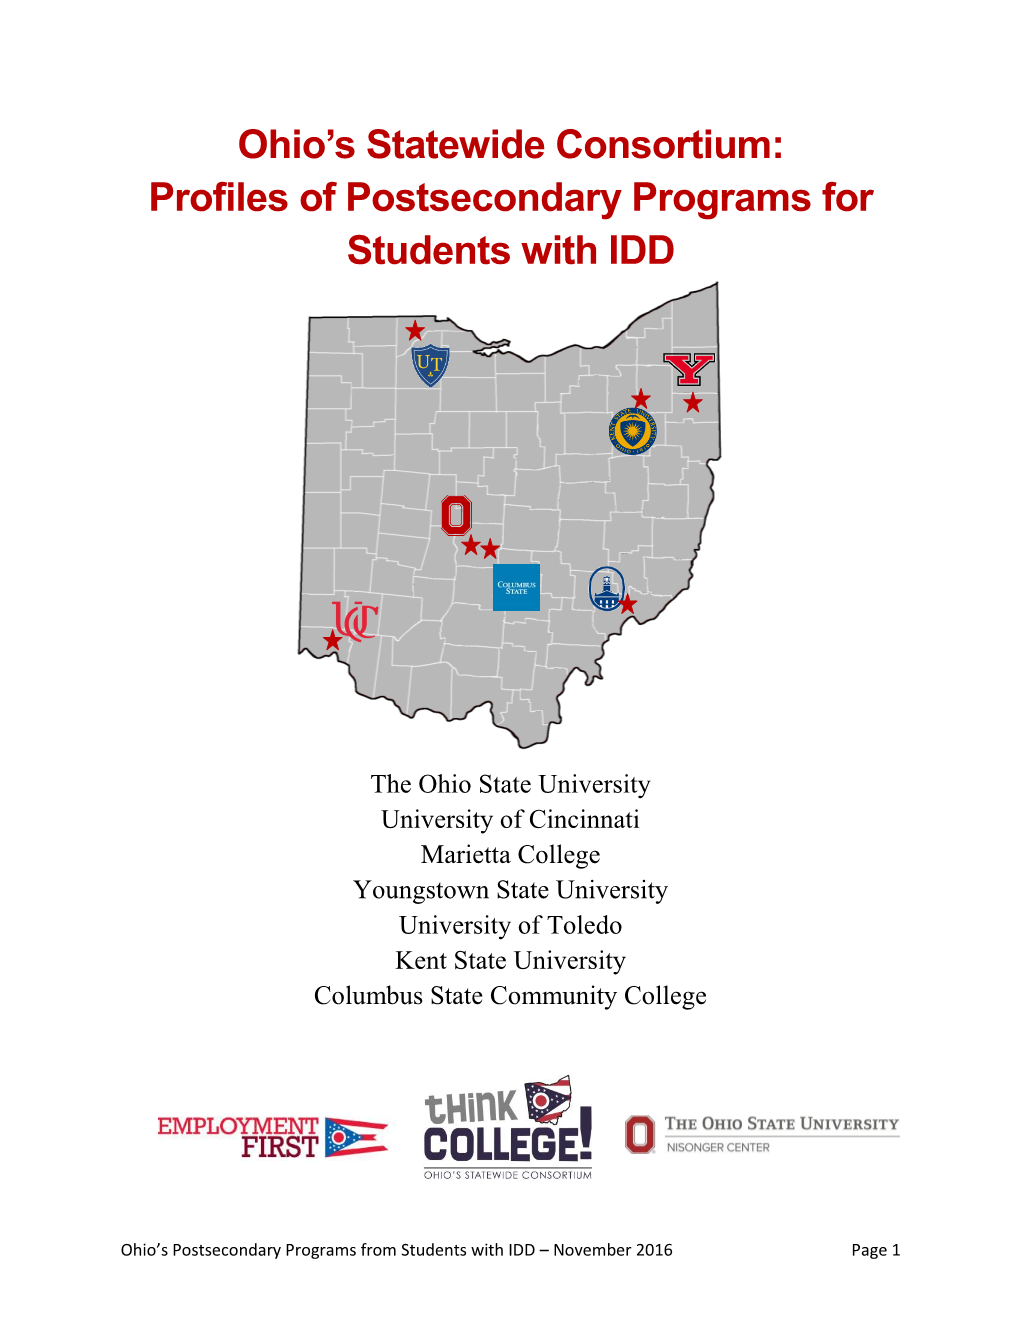 Profiles of Postsecondary Programs for Students with IDD